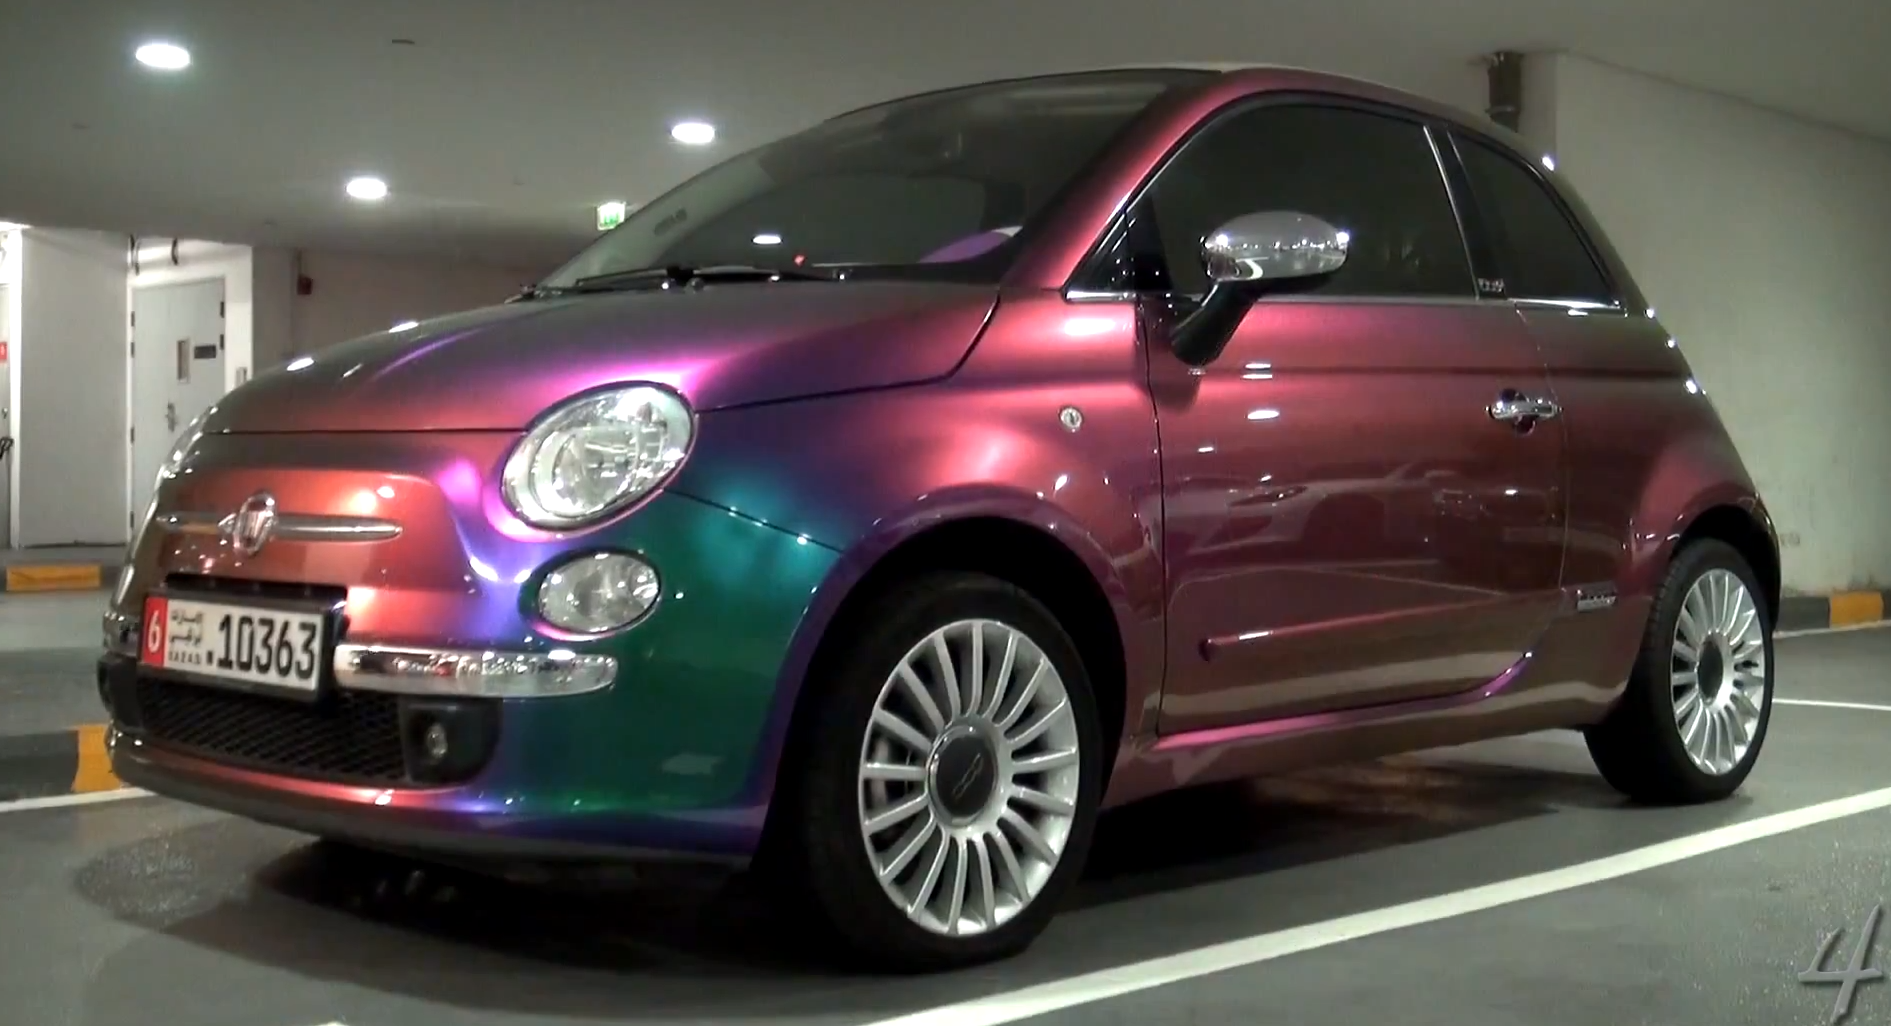 fiat-500-is-a-chameleon-at-dubai-mall-video-65824_1.png